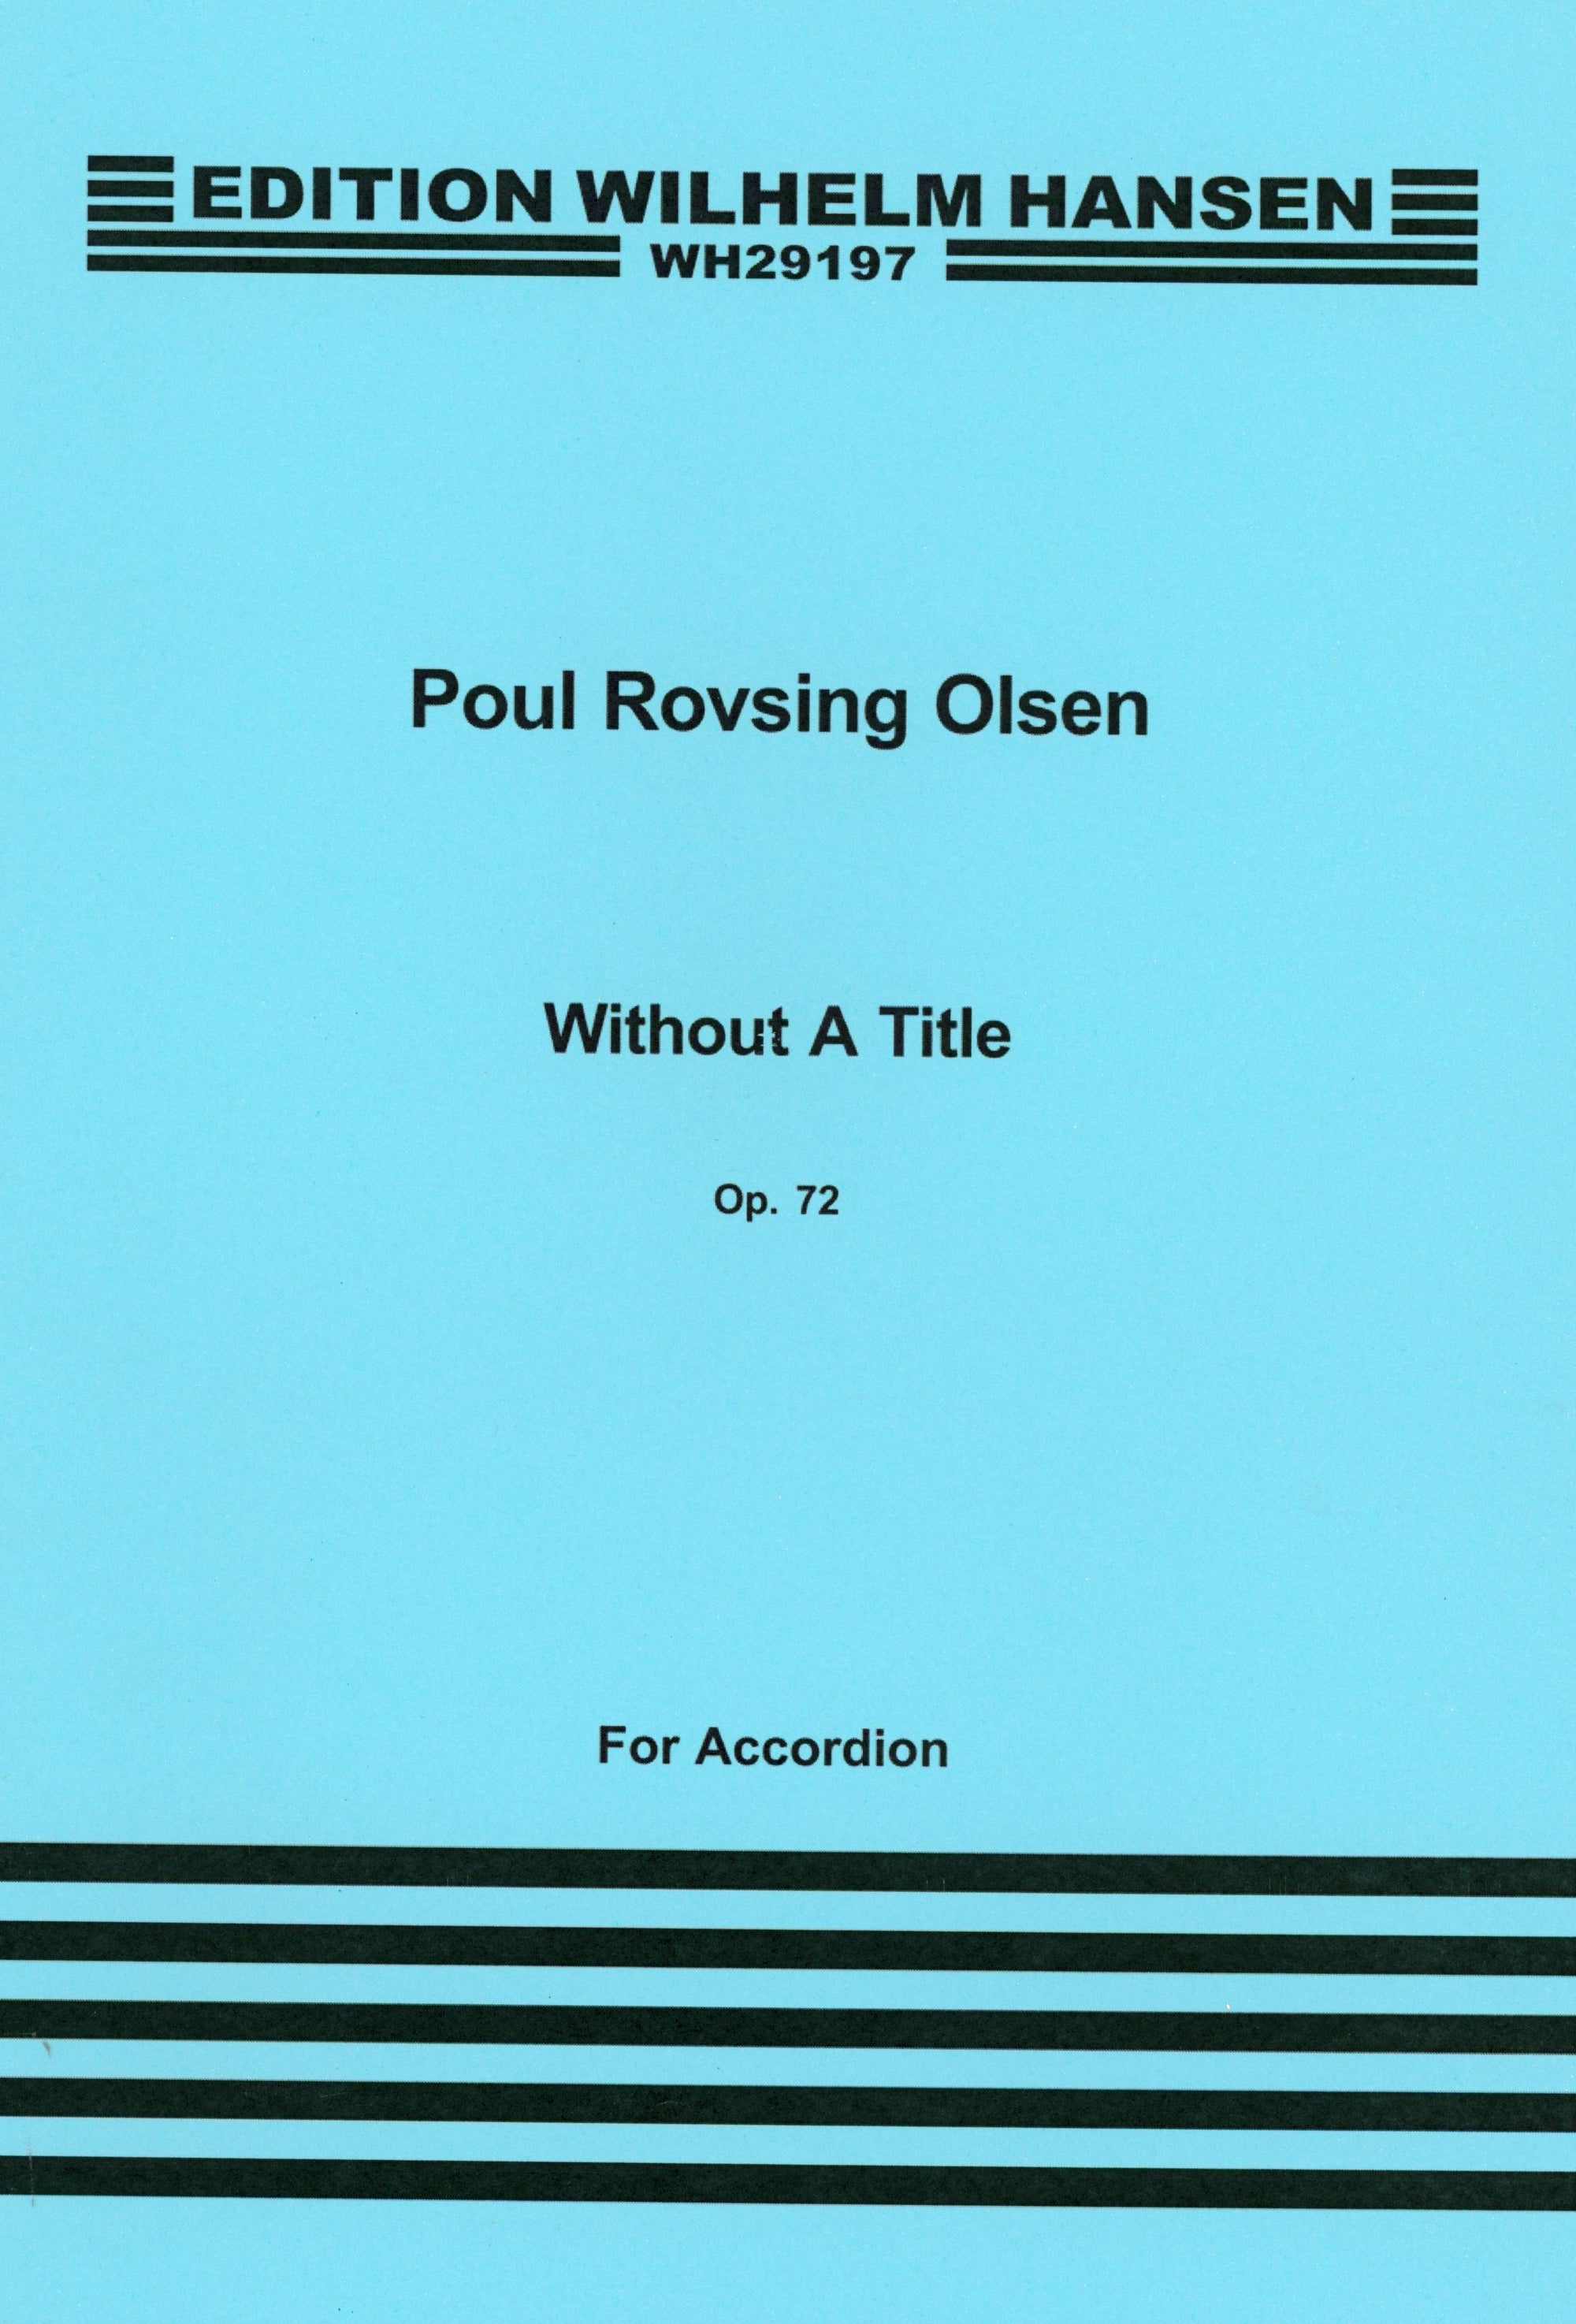 Olsen: Without A Title, Op. 72